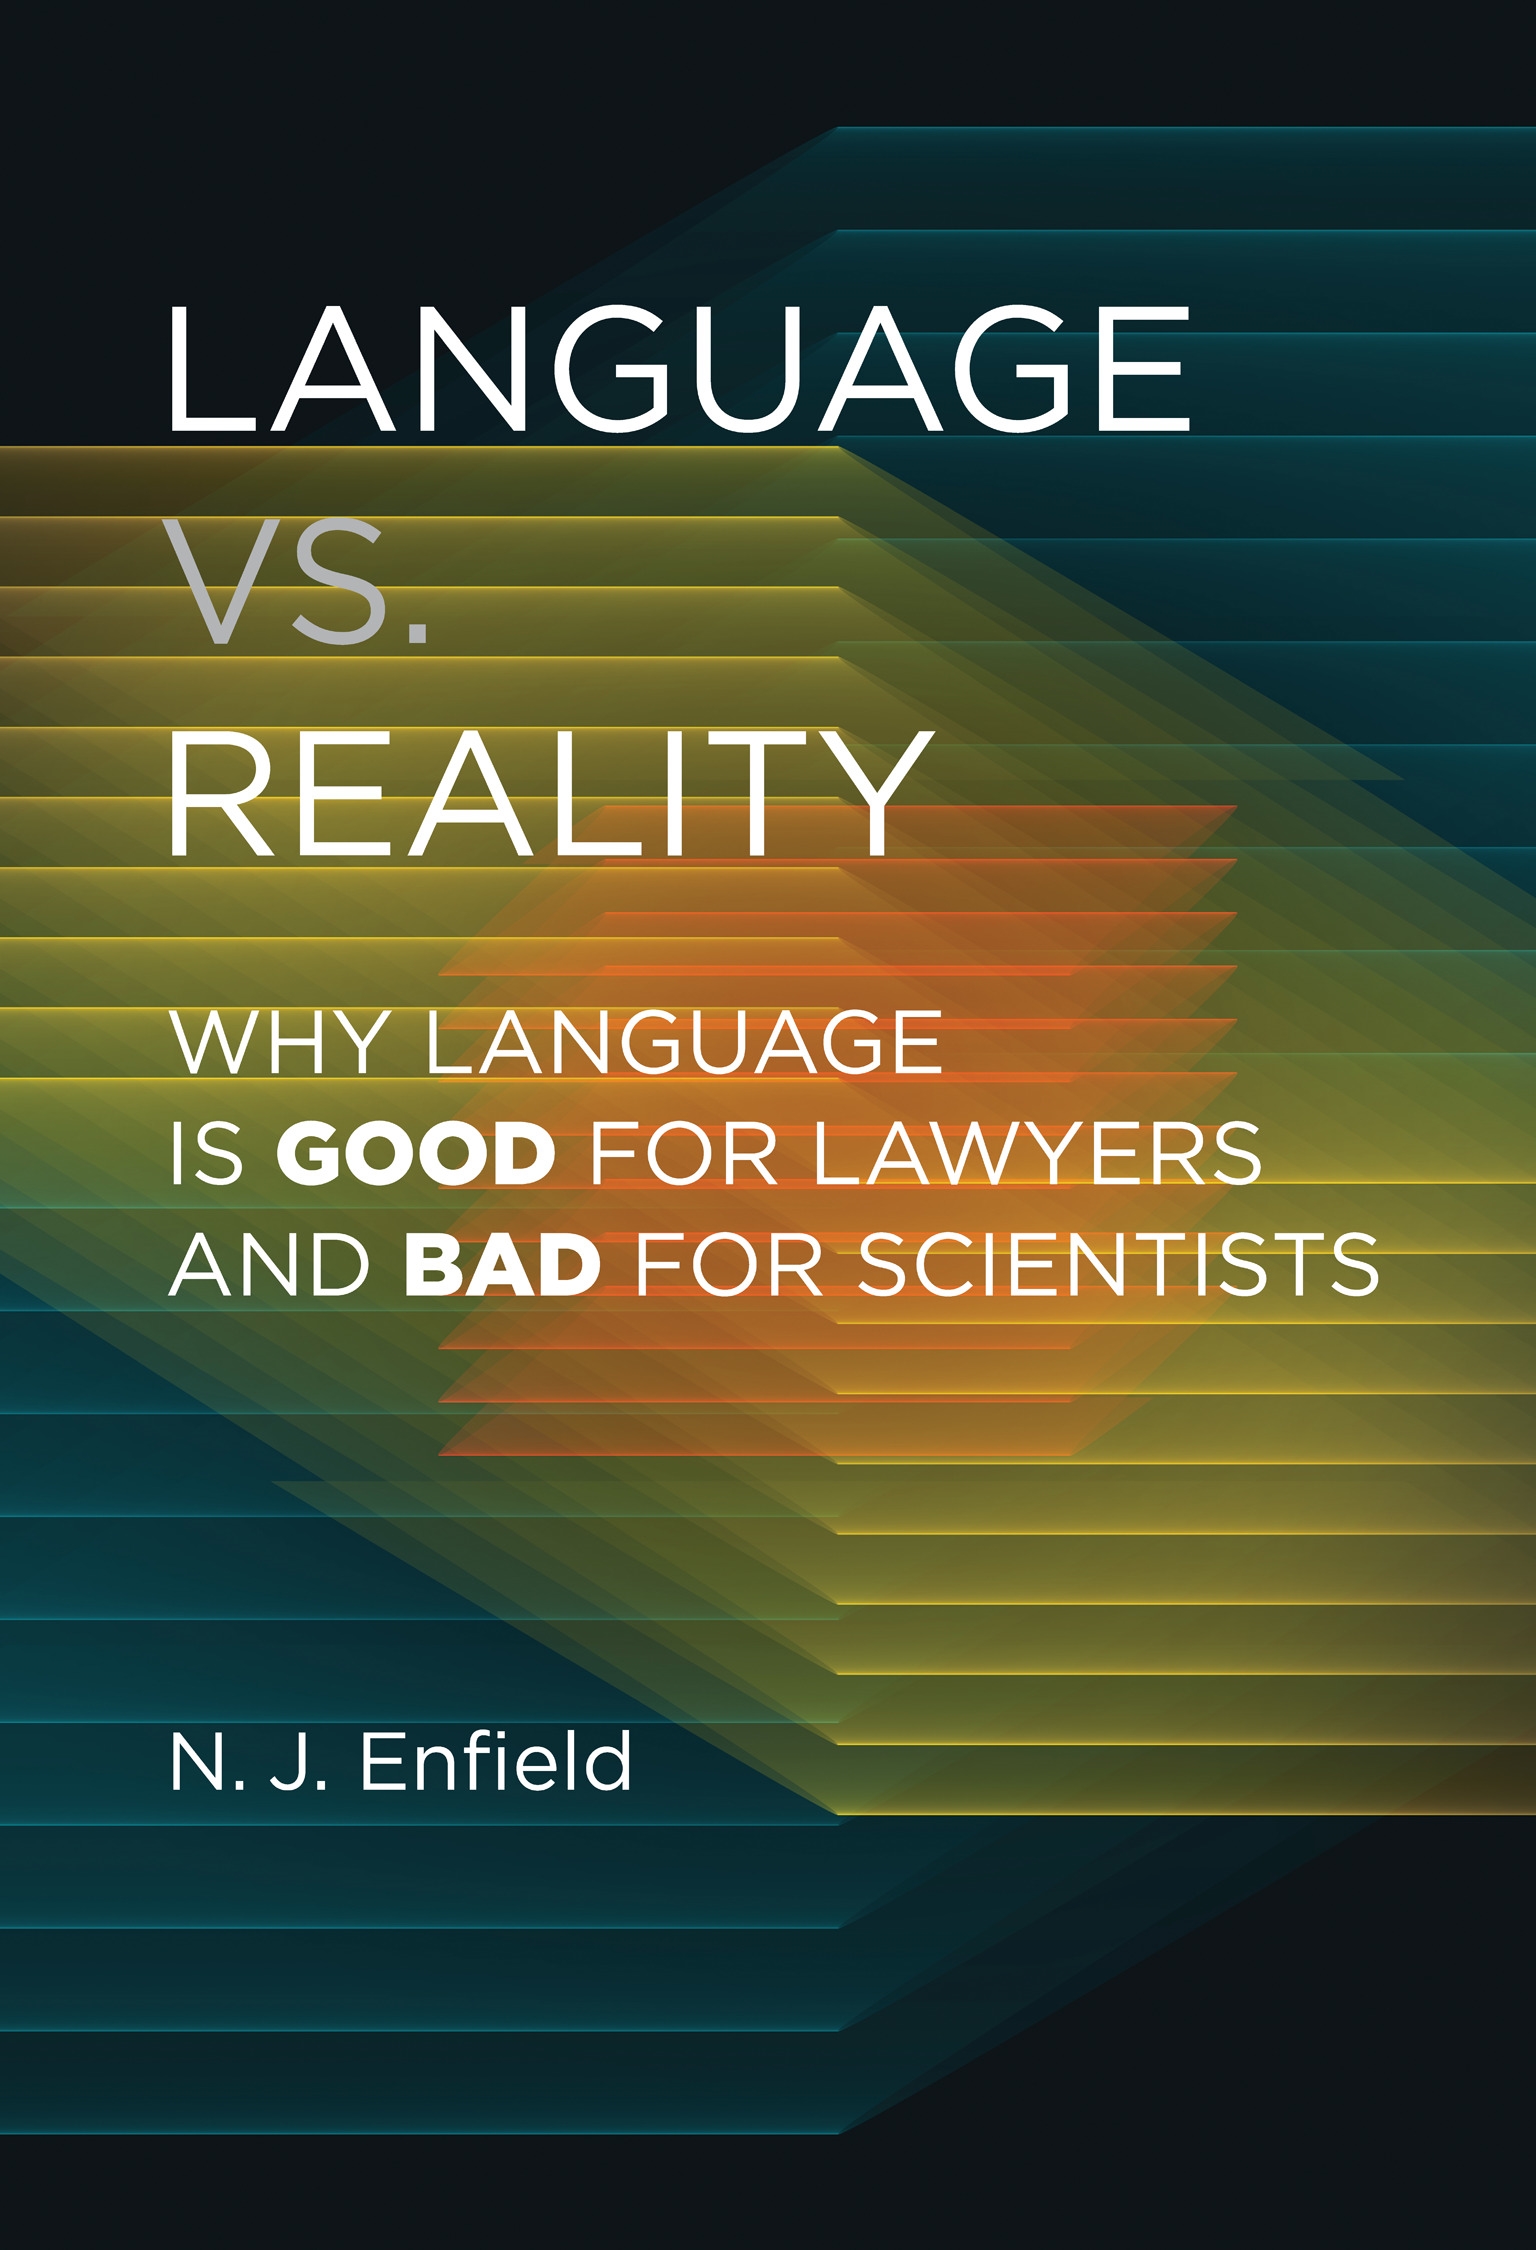 Language vs. Reality by N.J. Enfield - Penguin Books New Zealand